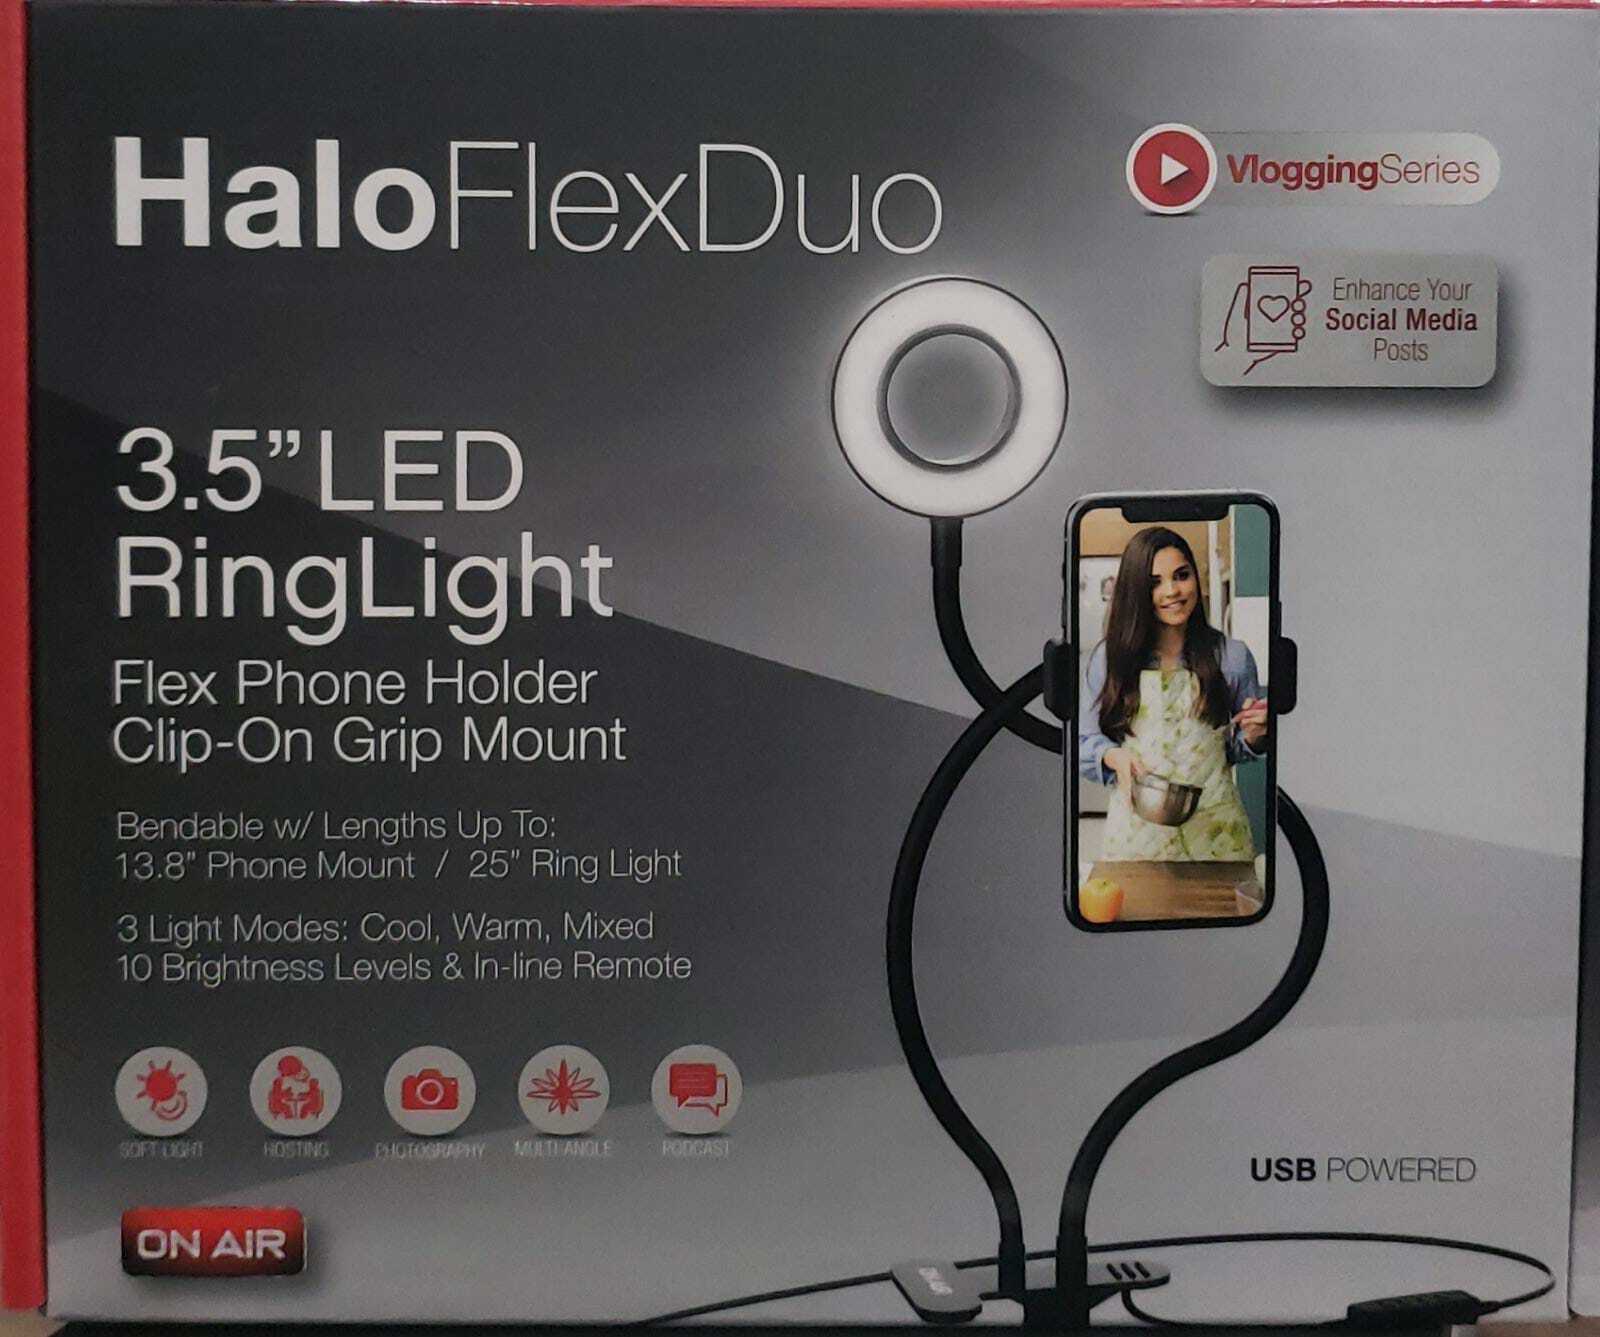 Primary image for Halo Flex Duo 3.5"LED RingLight Flex Phone Holder Clip-On Grip Mount